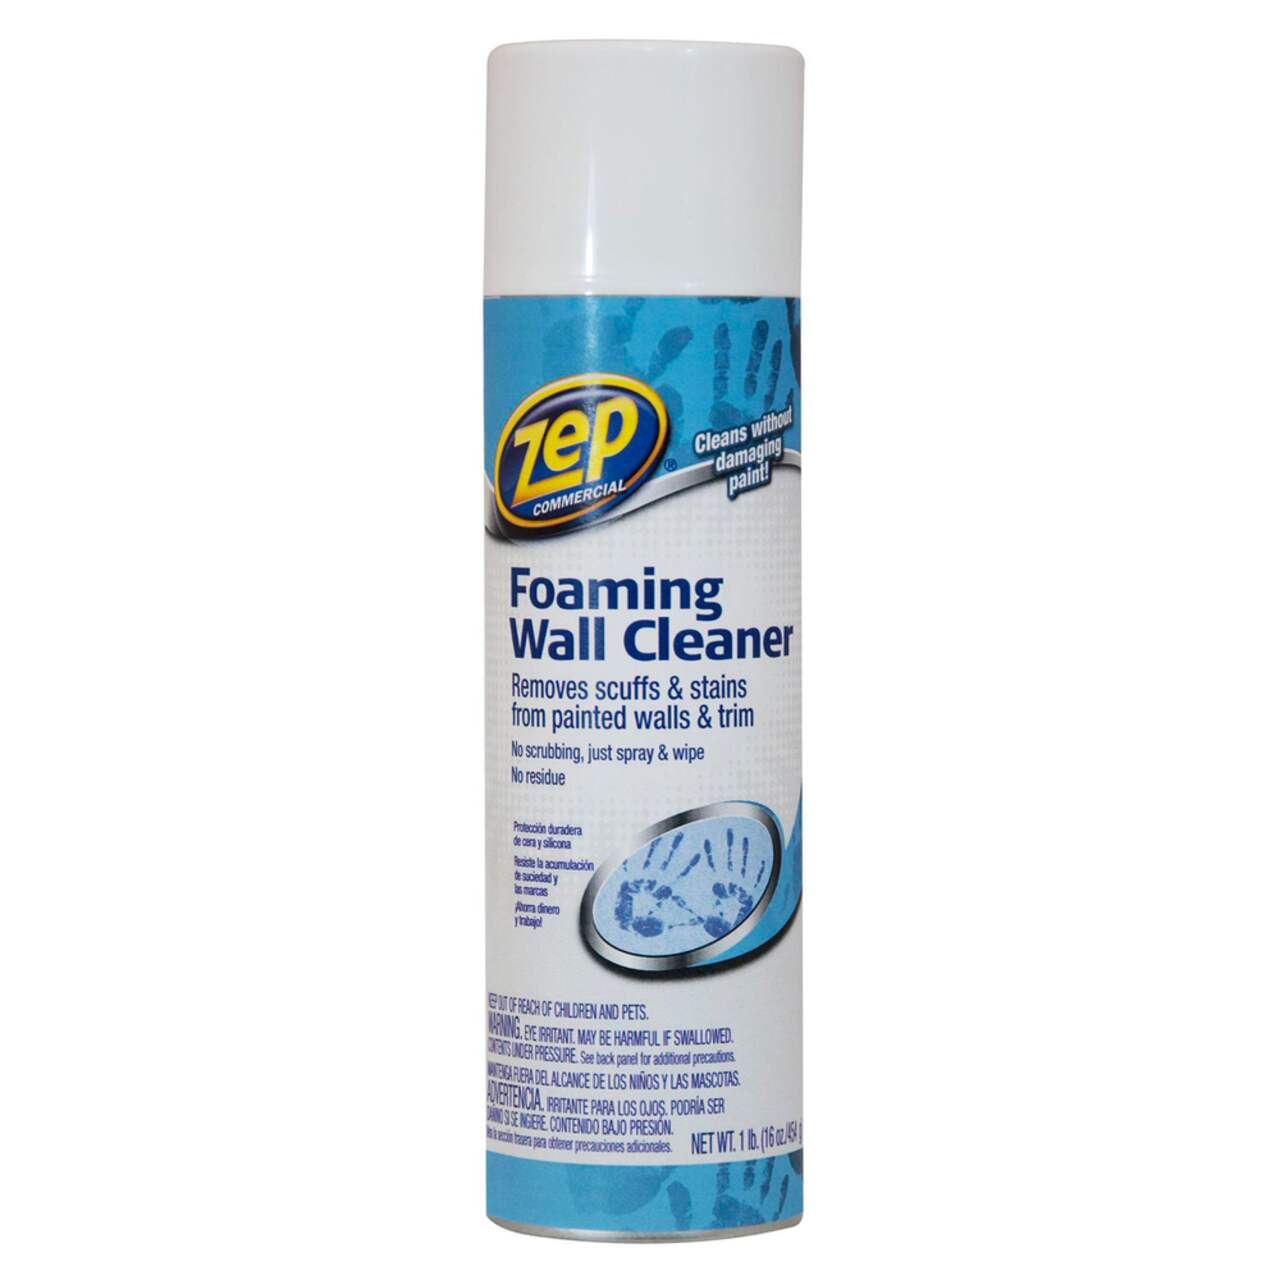 https://media-www.canadiantire.ca/product/living/cleaning/household-cleaning-solutions/1530455/zep-foaming-wall-cleaner-008597f0-a6d5-47ec-918a-903bf4377009.png?imdensity=1&imwidth=640&impolicy=mZoom